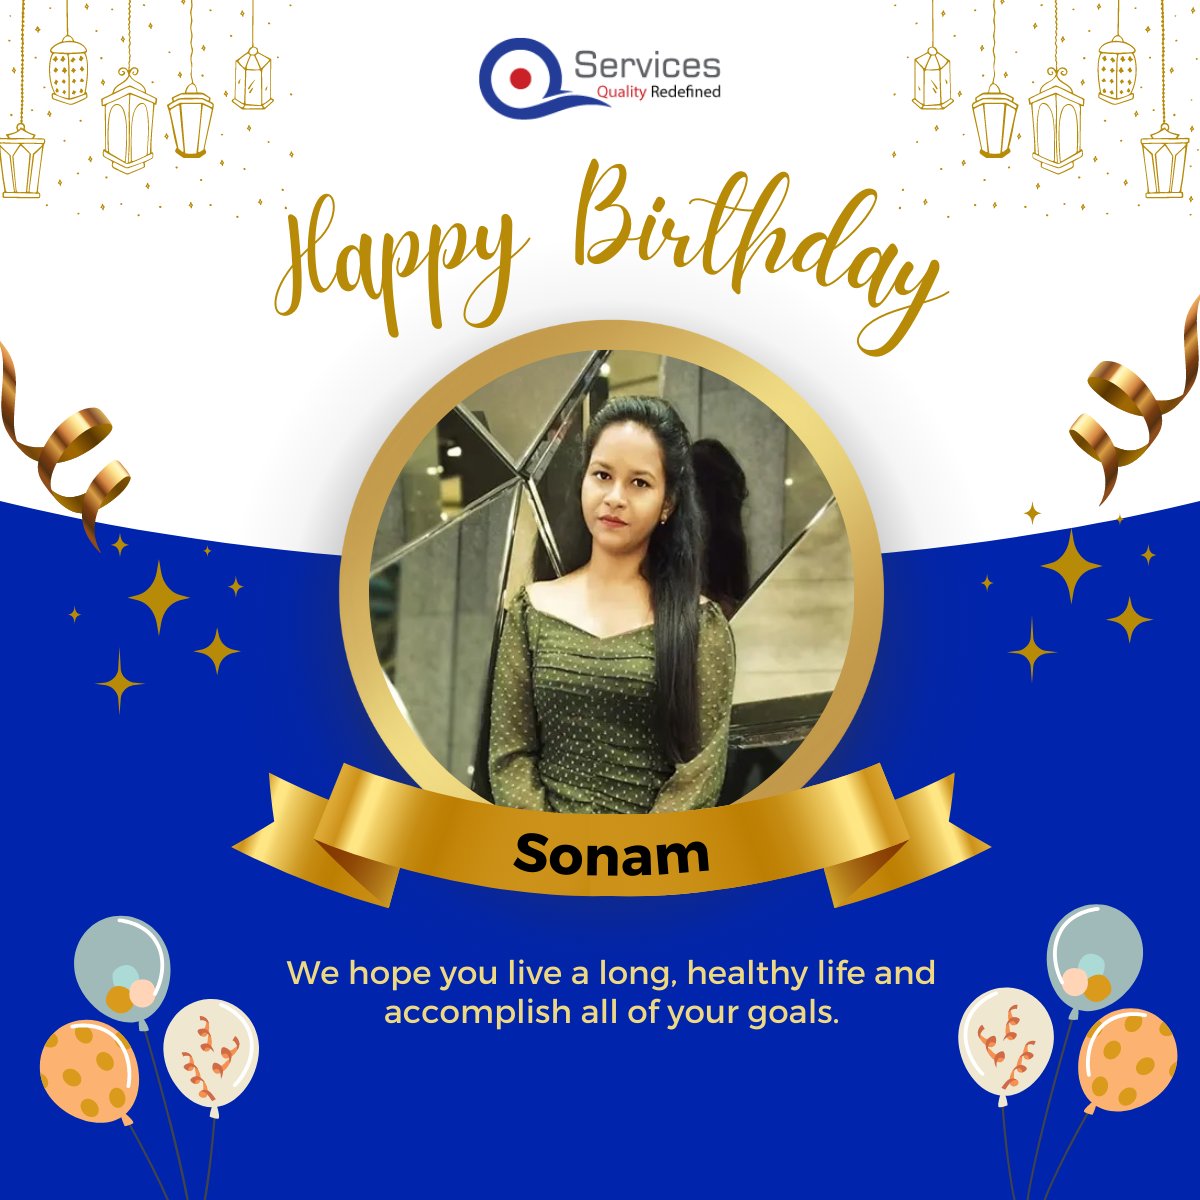 Happy birthday! May this day bring you joy, and may the year ahead be filled with success, good health, and countless opportunities. Thank you for your hard work and dedication to our team!

#happybirthday #birthdaywish #birthdaycake #birthdaygift #birthdaycelebration #QServices